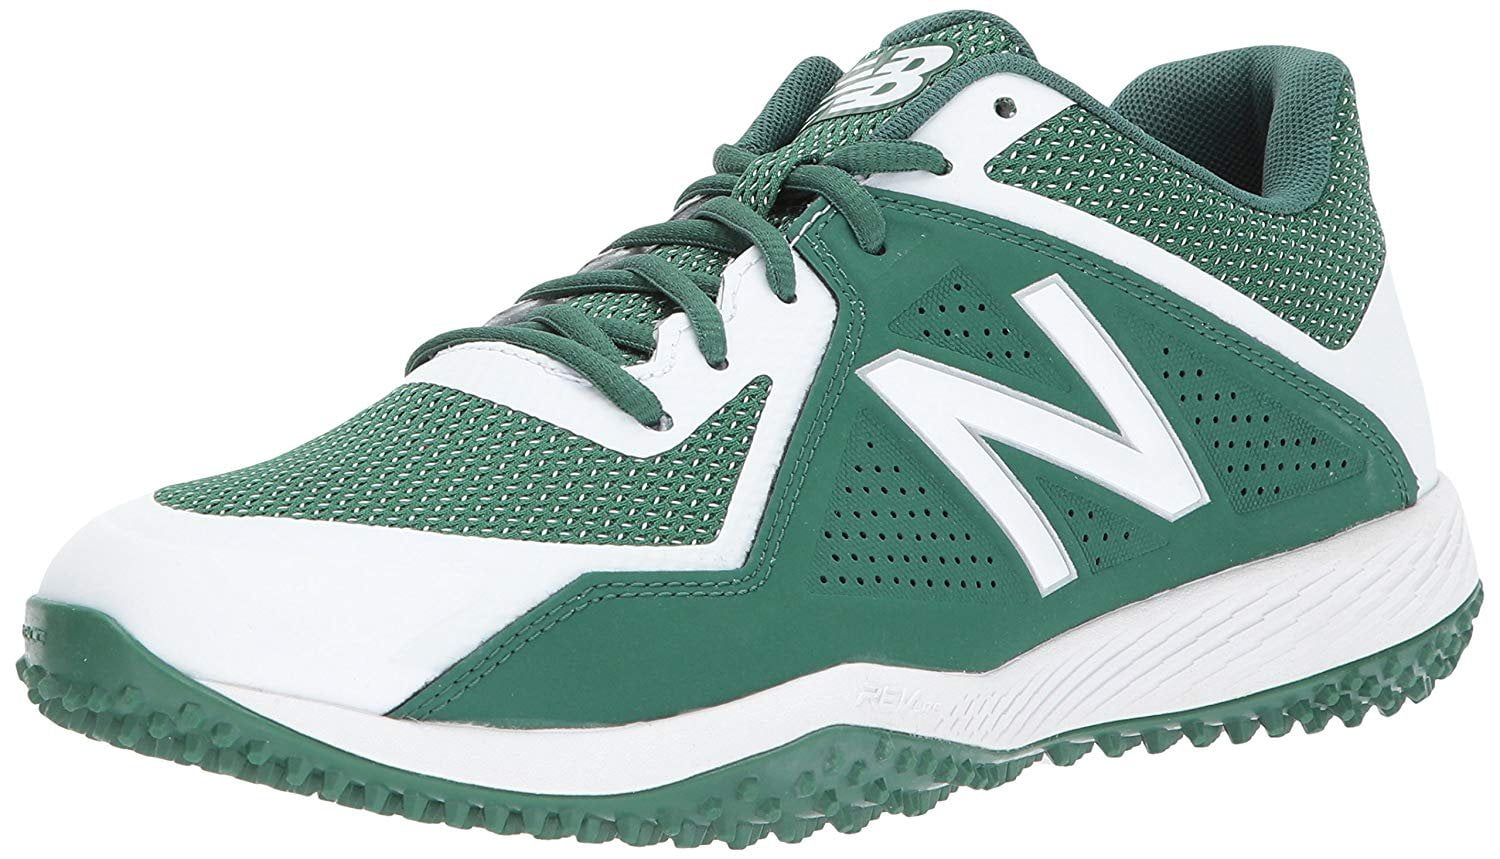 New Balance Men?s Athletic Sneakers T4040 Turf Baseball Synthetic Mid ...